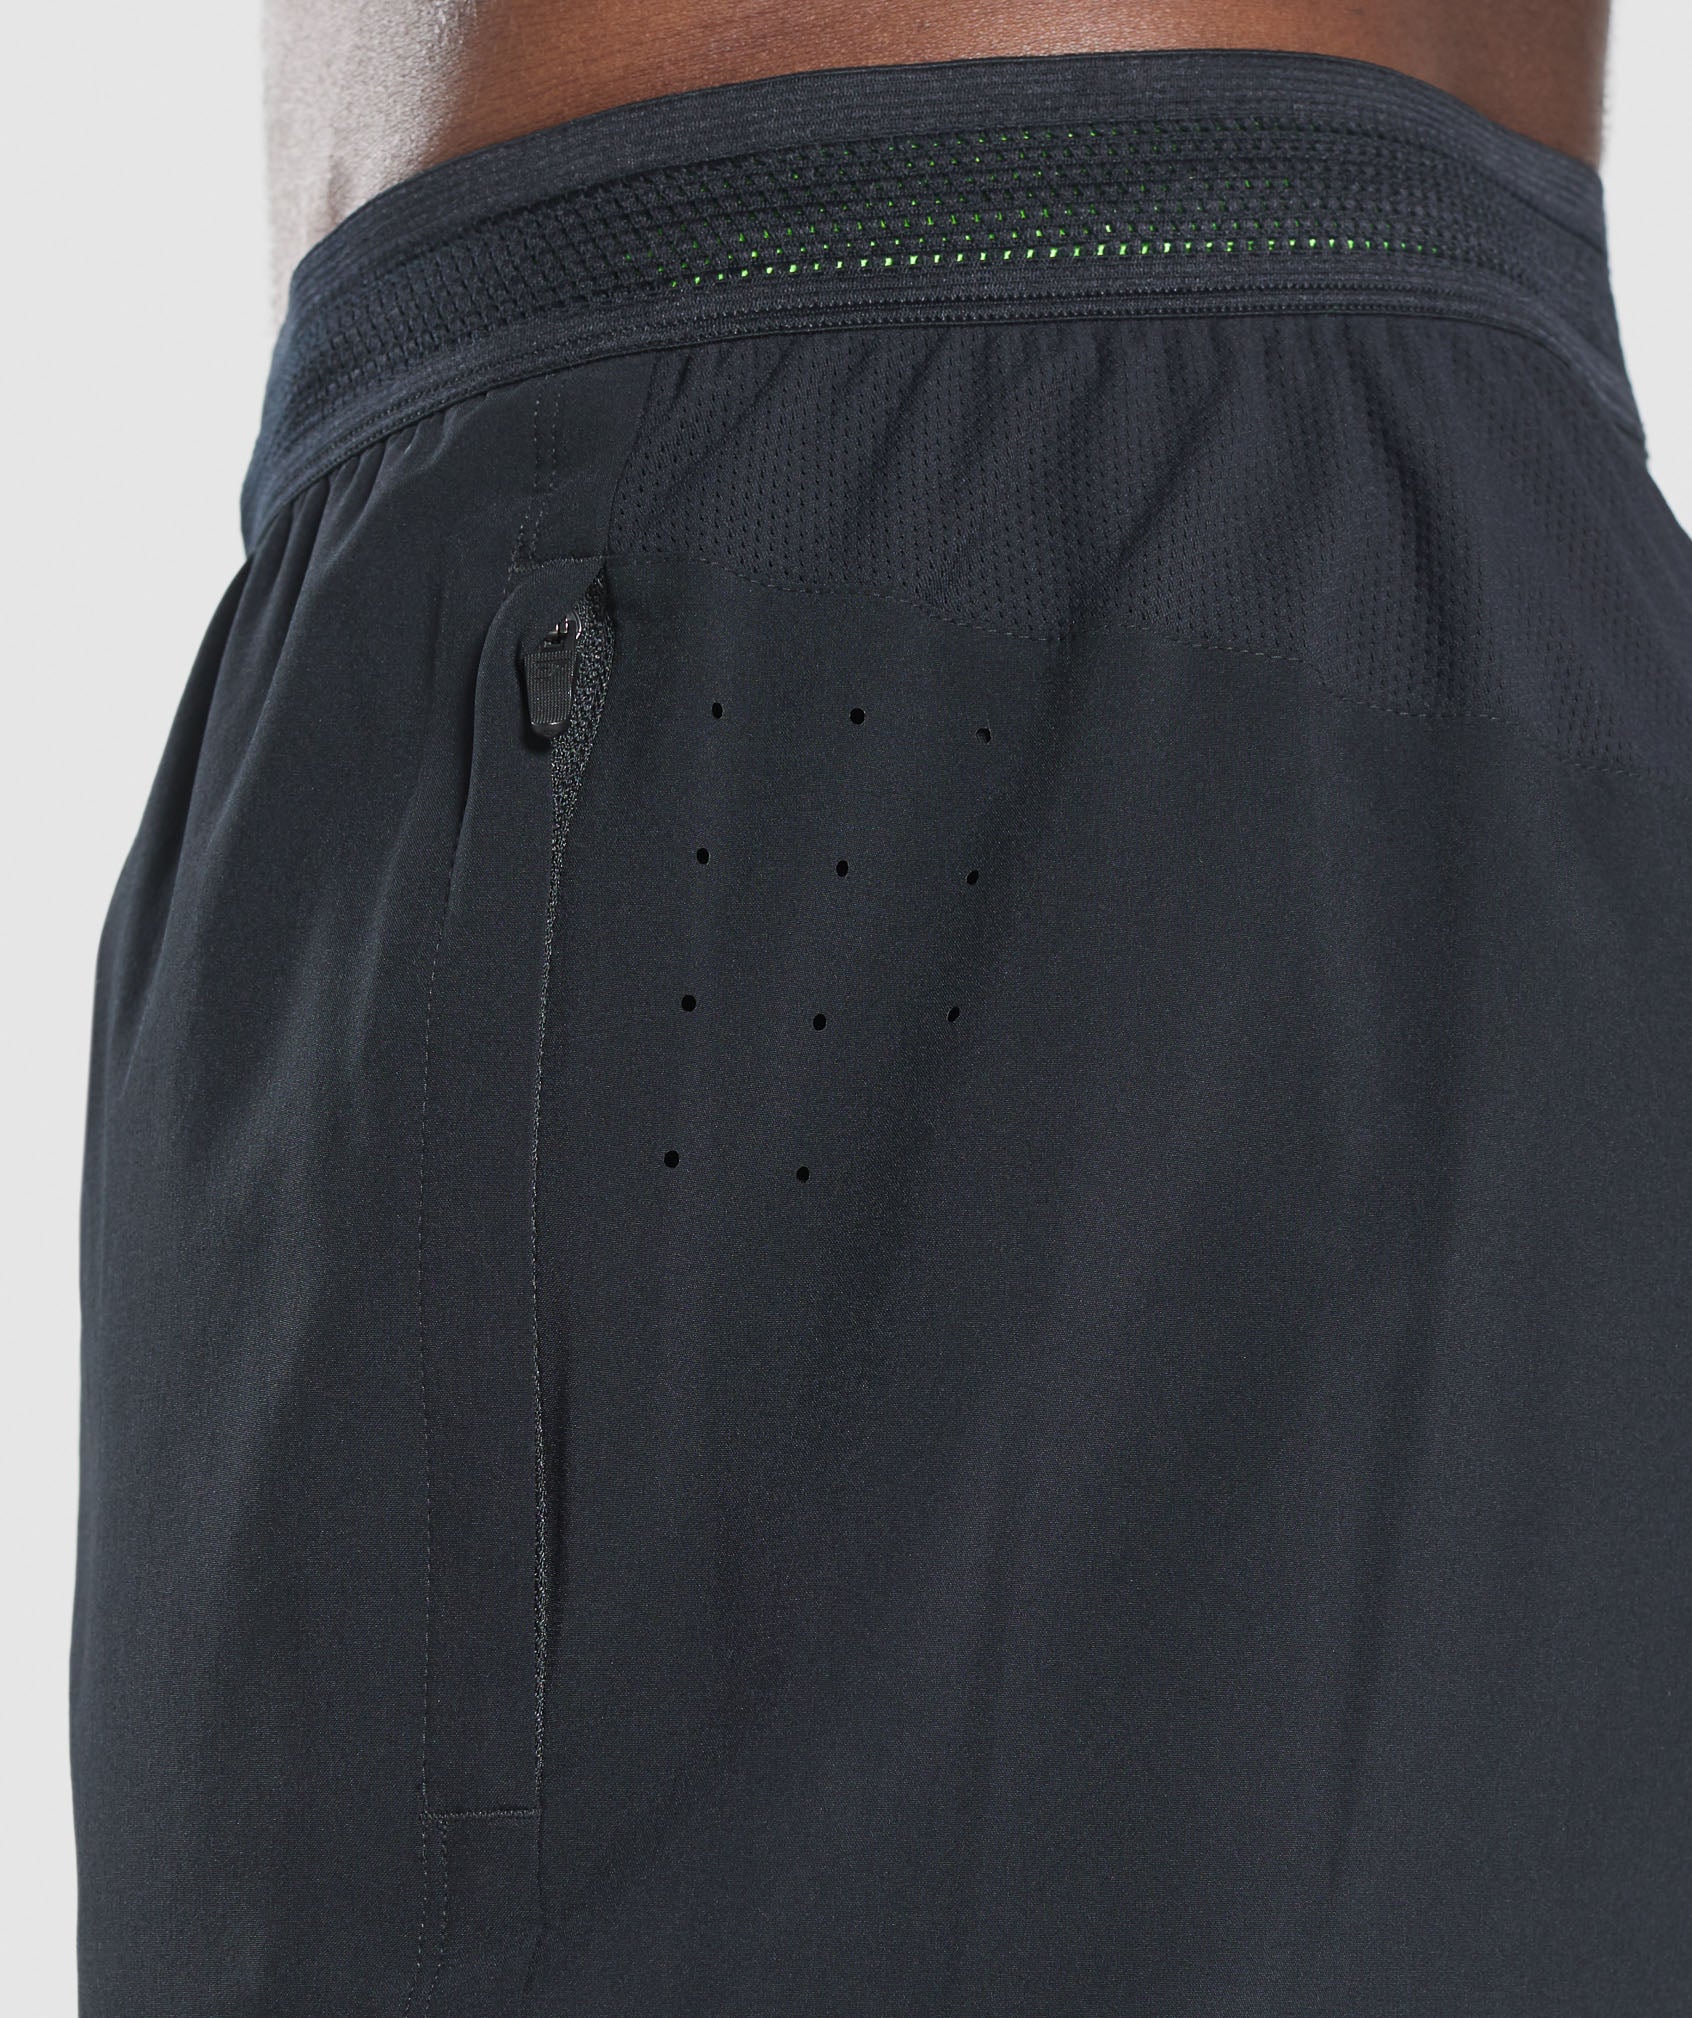 Speed 5" Shorts in Black - view 6